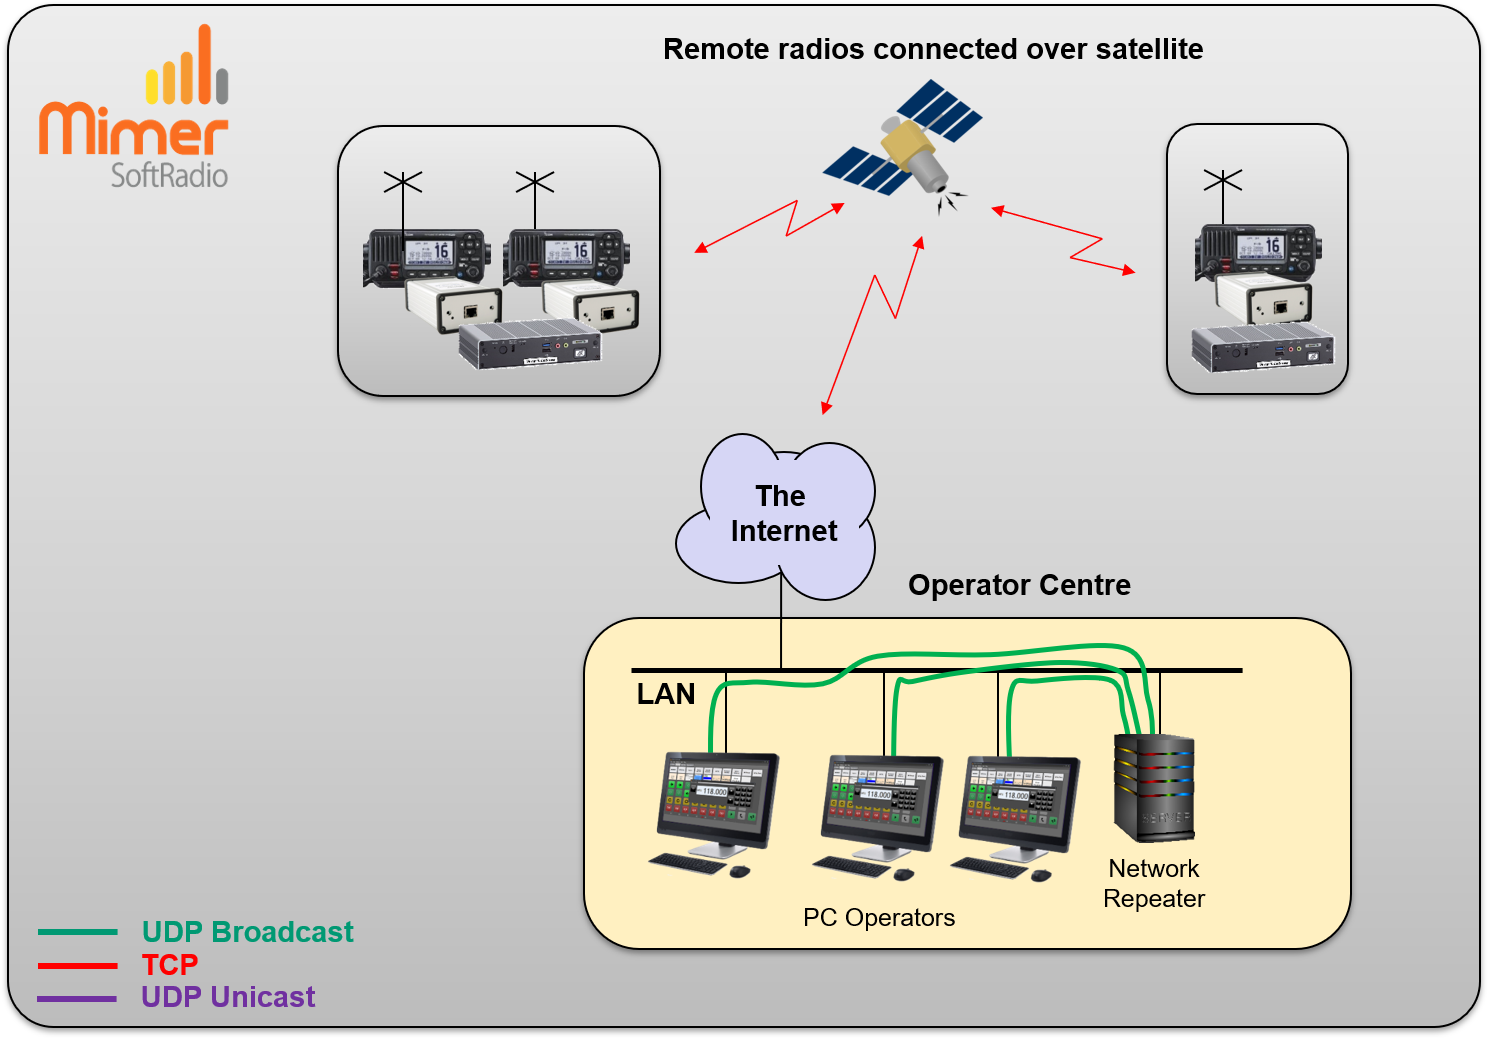 NetworkRepeater connects with UDP Multicast to all operators in the same LAN